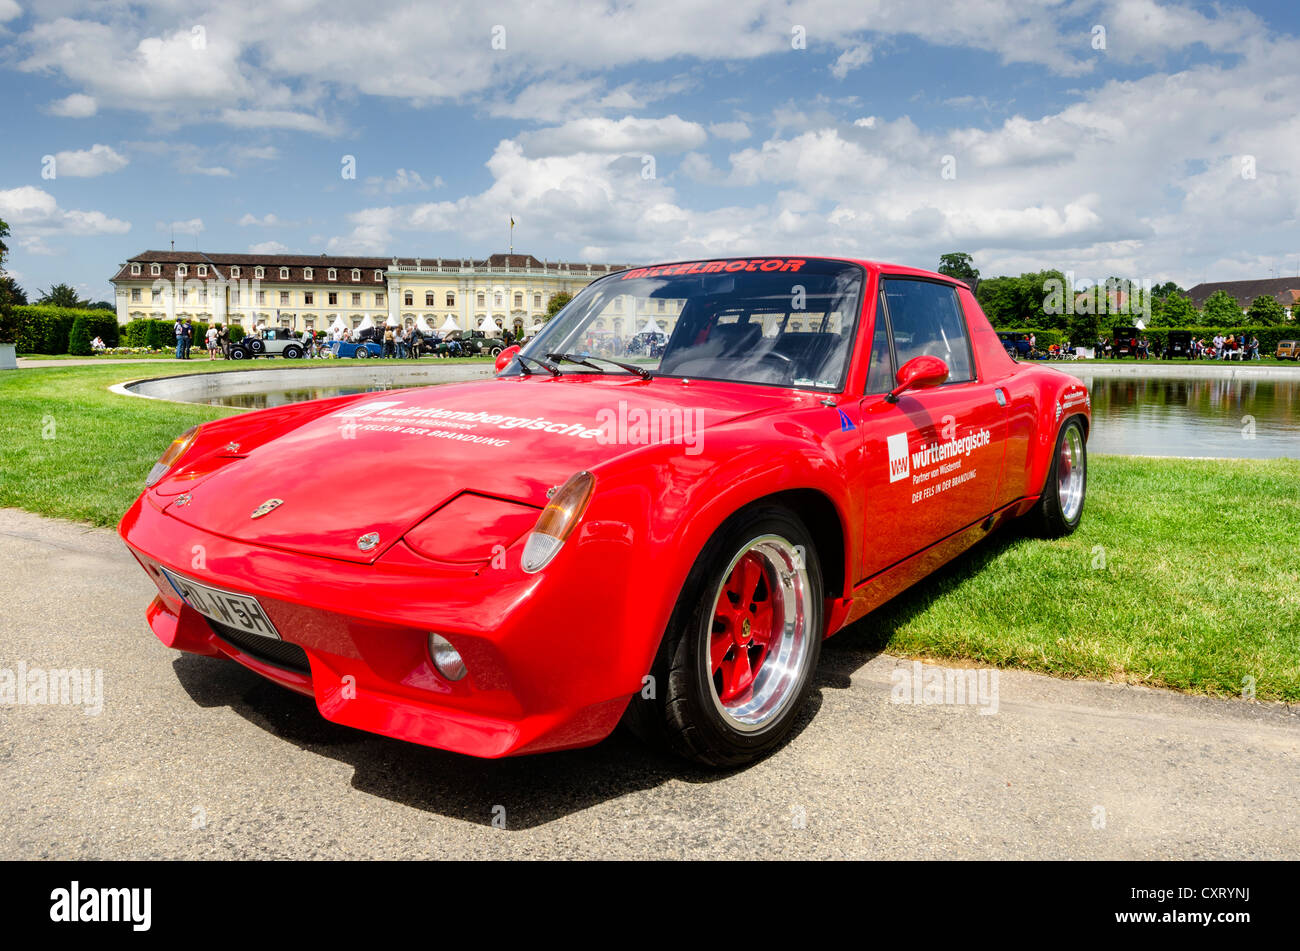 VW-Porsche 914, built from 1969, festival of classic cars 'Retro Classics meets Barock', Schloss Ludwigsburg Palace Stock Photo